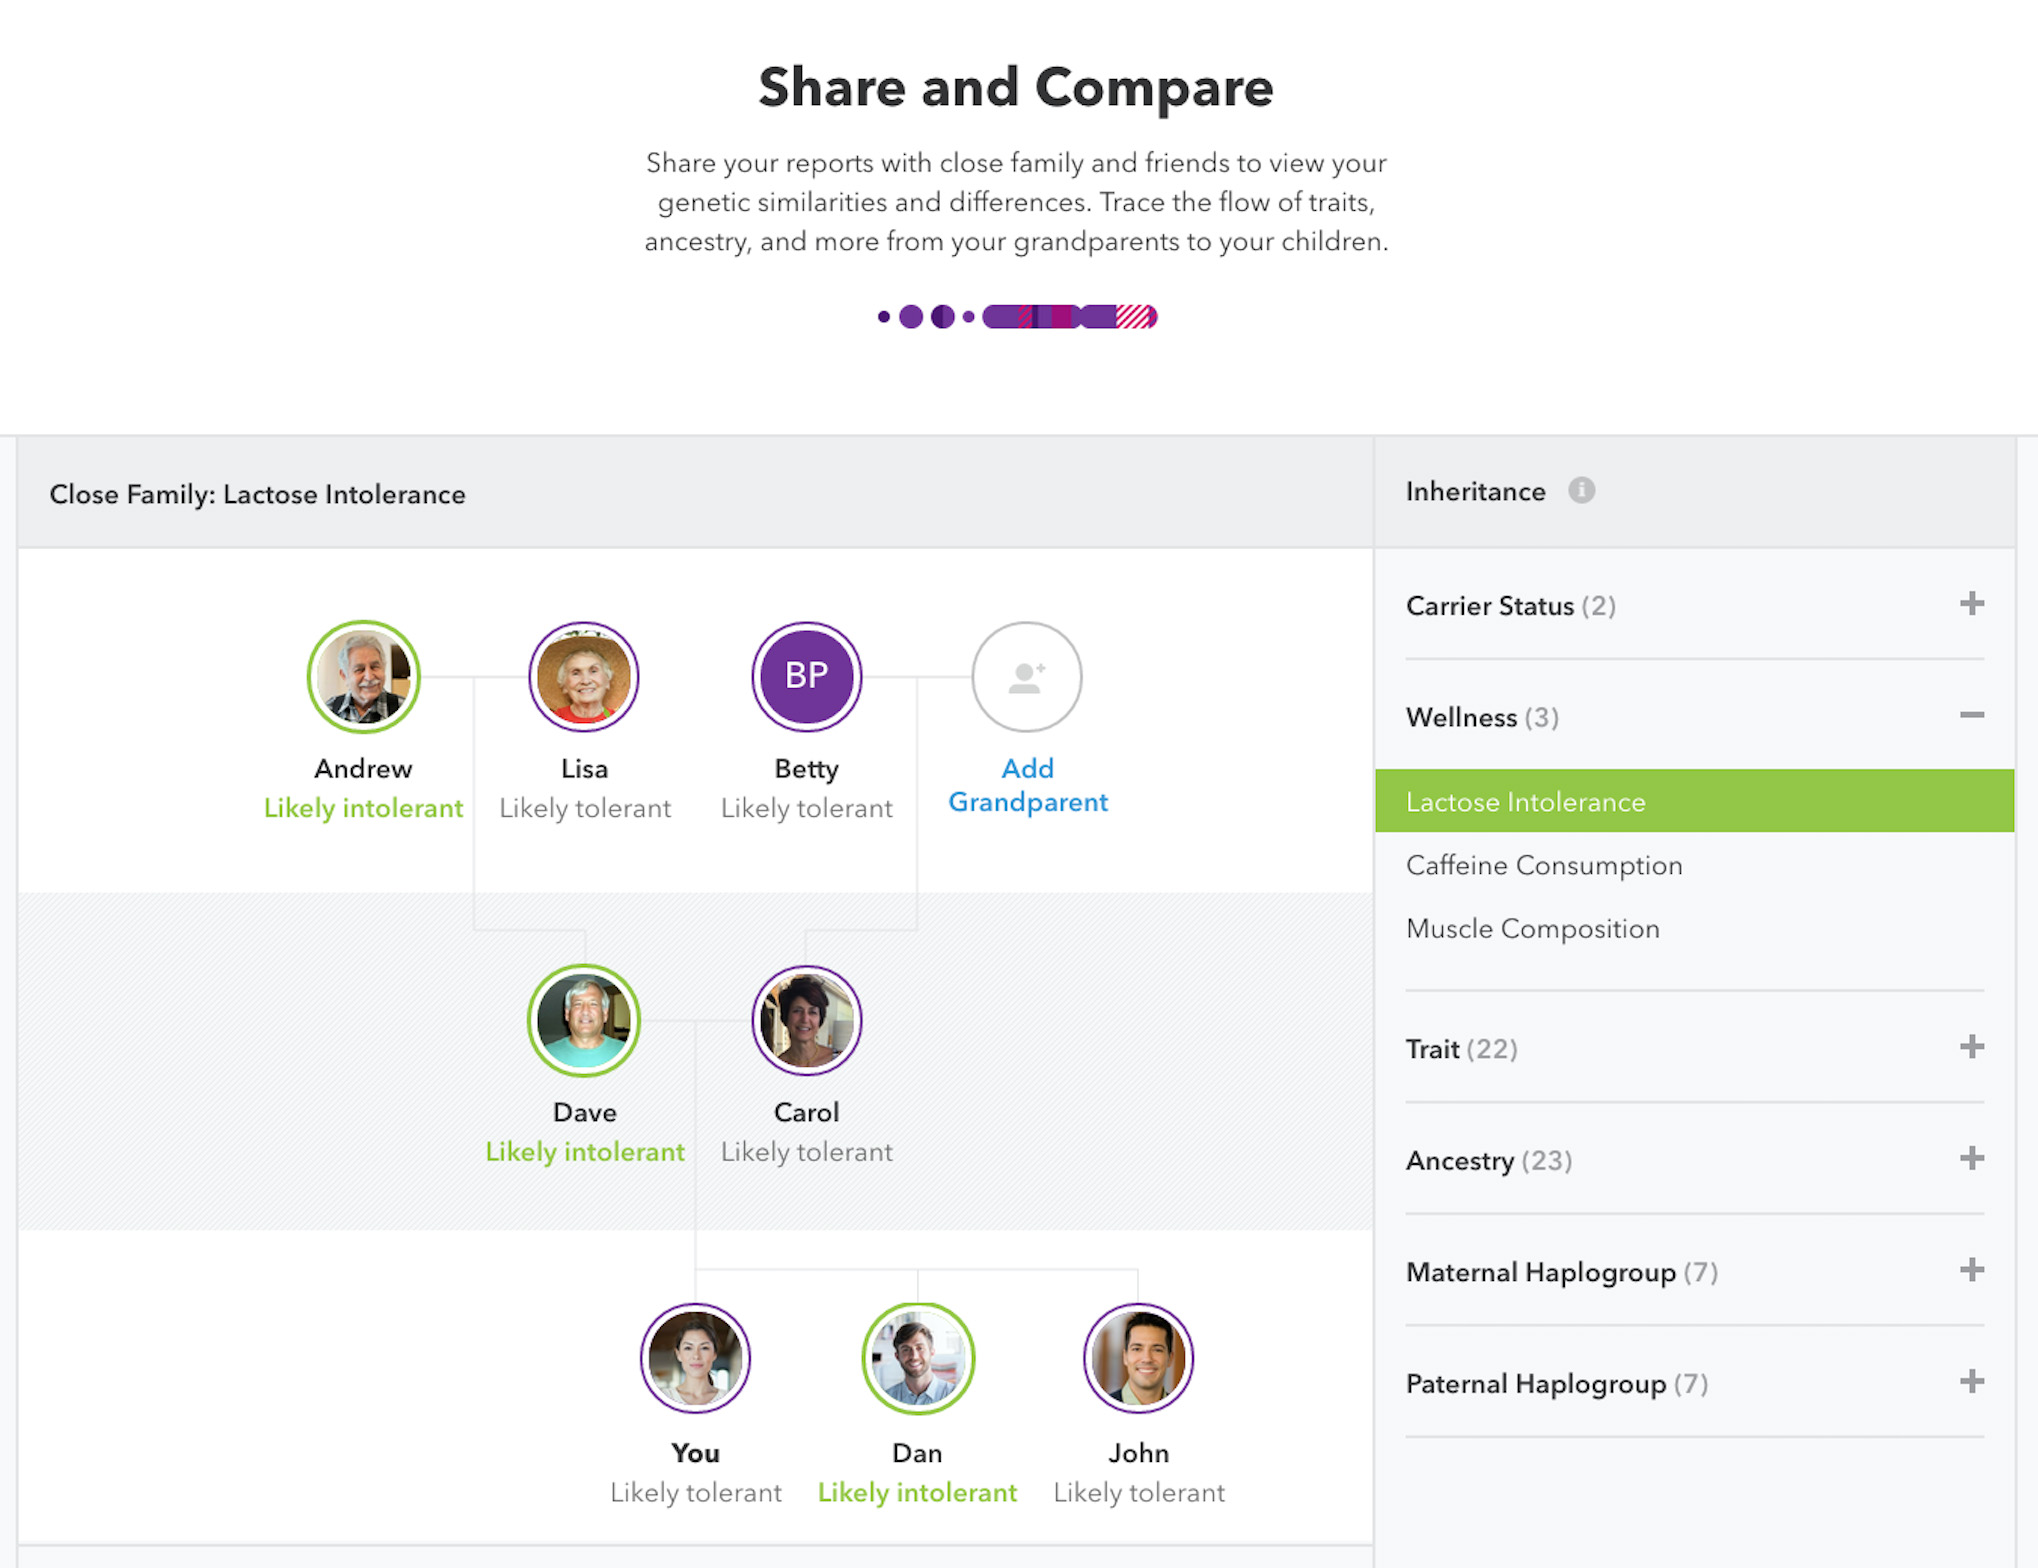 Share your reports with close family and friends to view your genetic similarities and differences. Trace the flow of traits, ancestry, and more from your grandparents to your children.